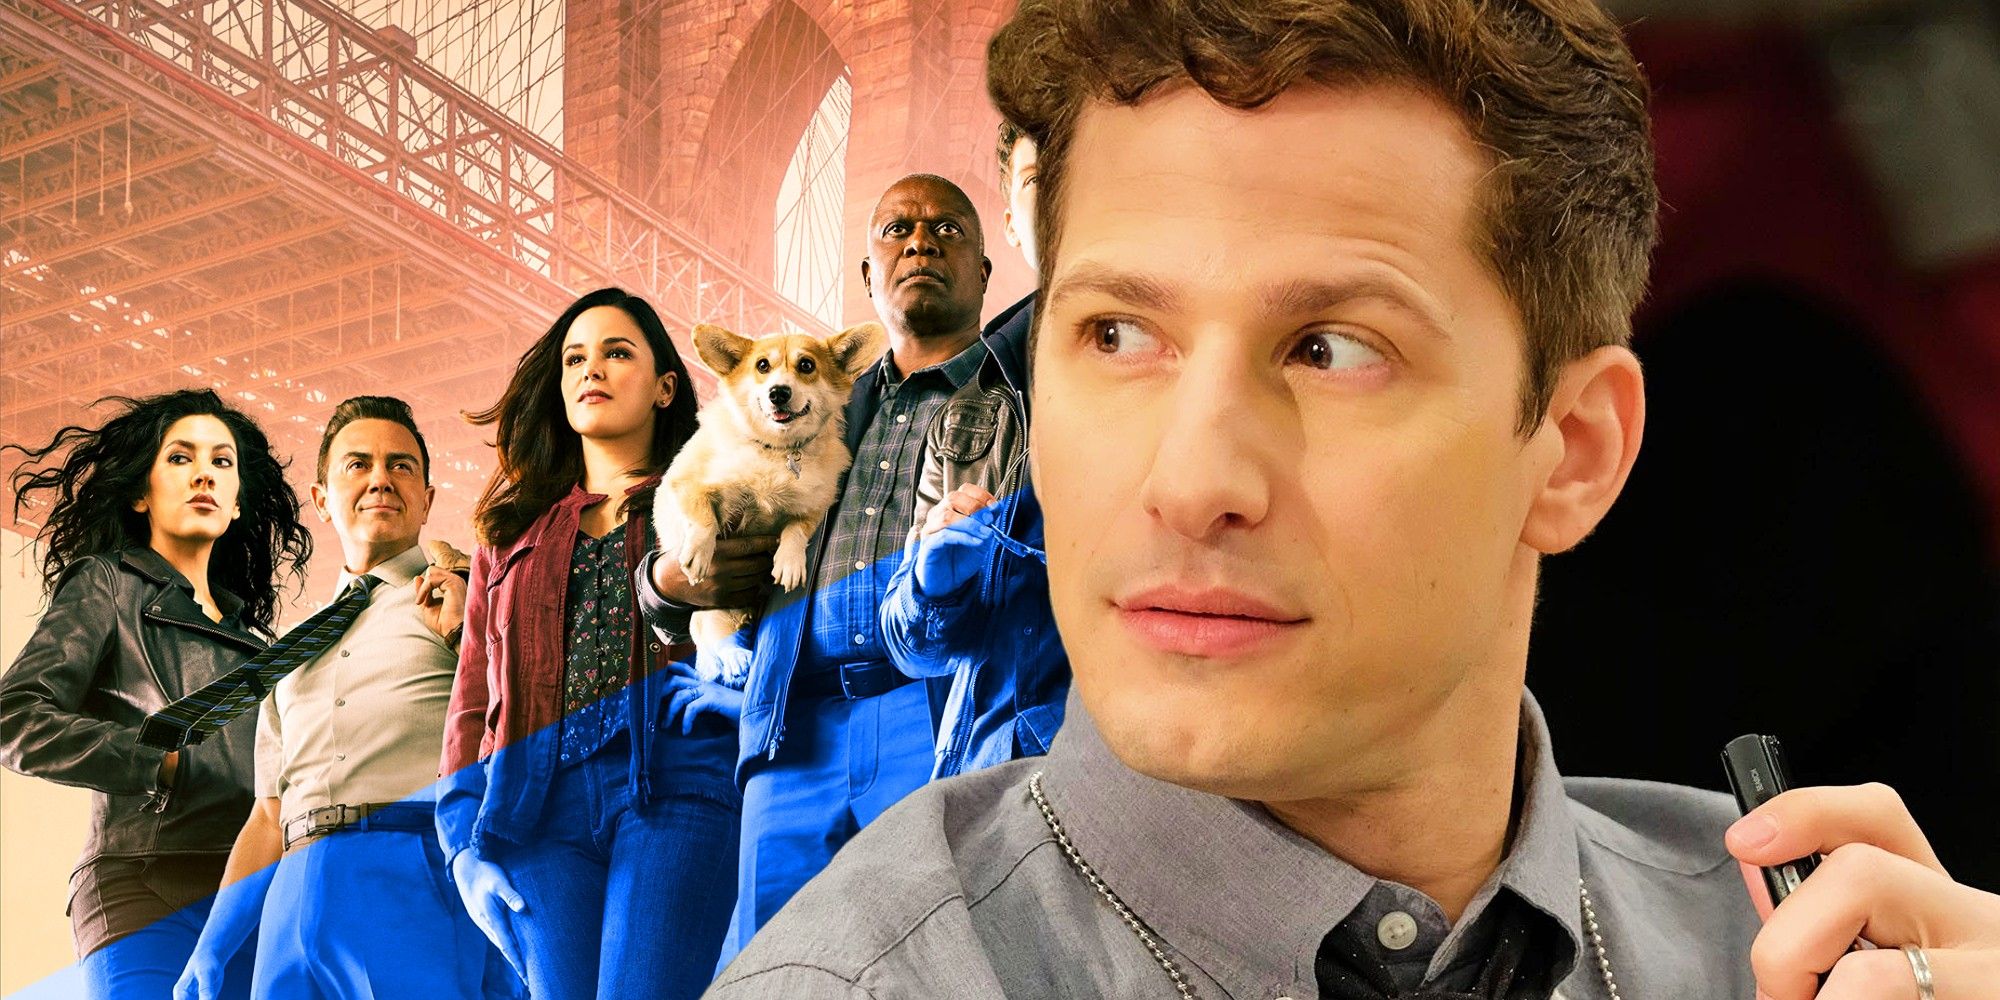 The cast of Brooklyn 99 with a close up of Jake